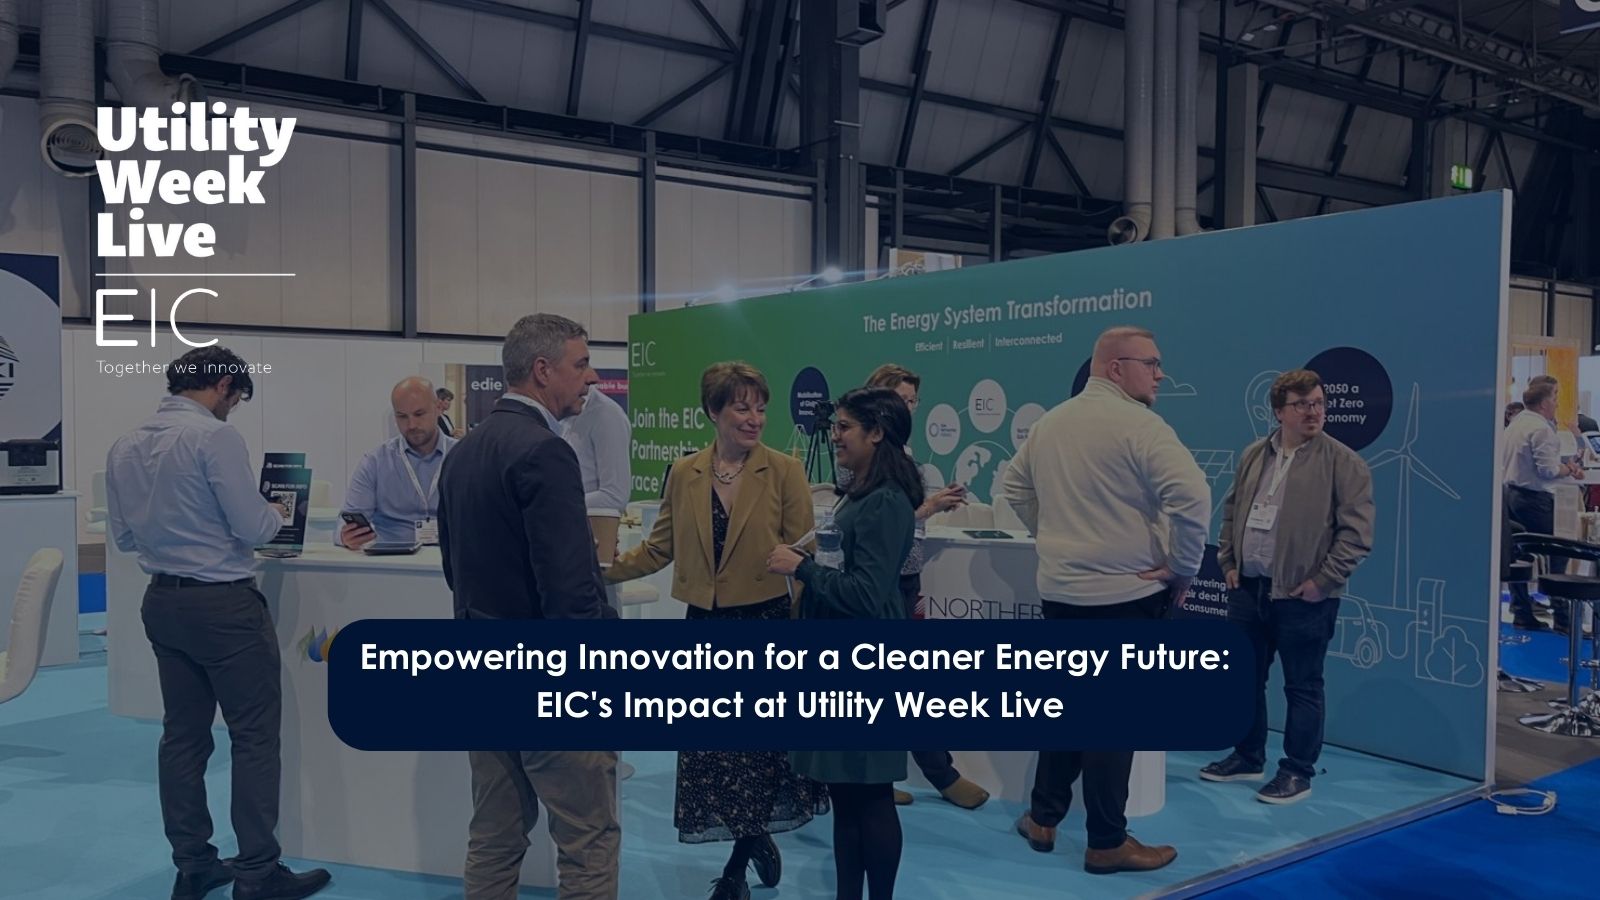 Empowering Innovation for a Cleaner Energy Future: EIC's Impact at Utility Week Live